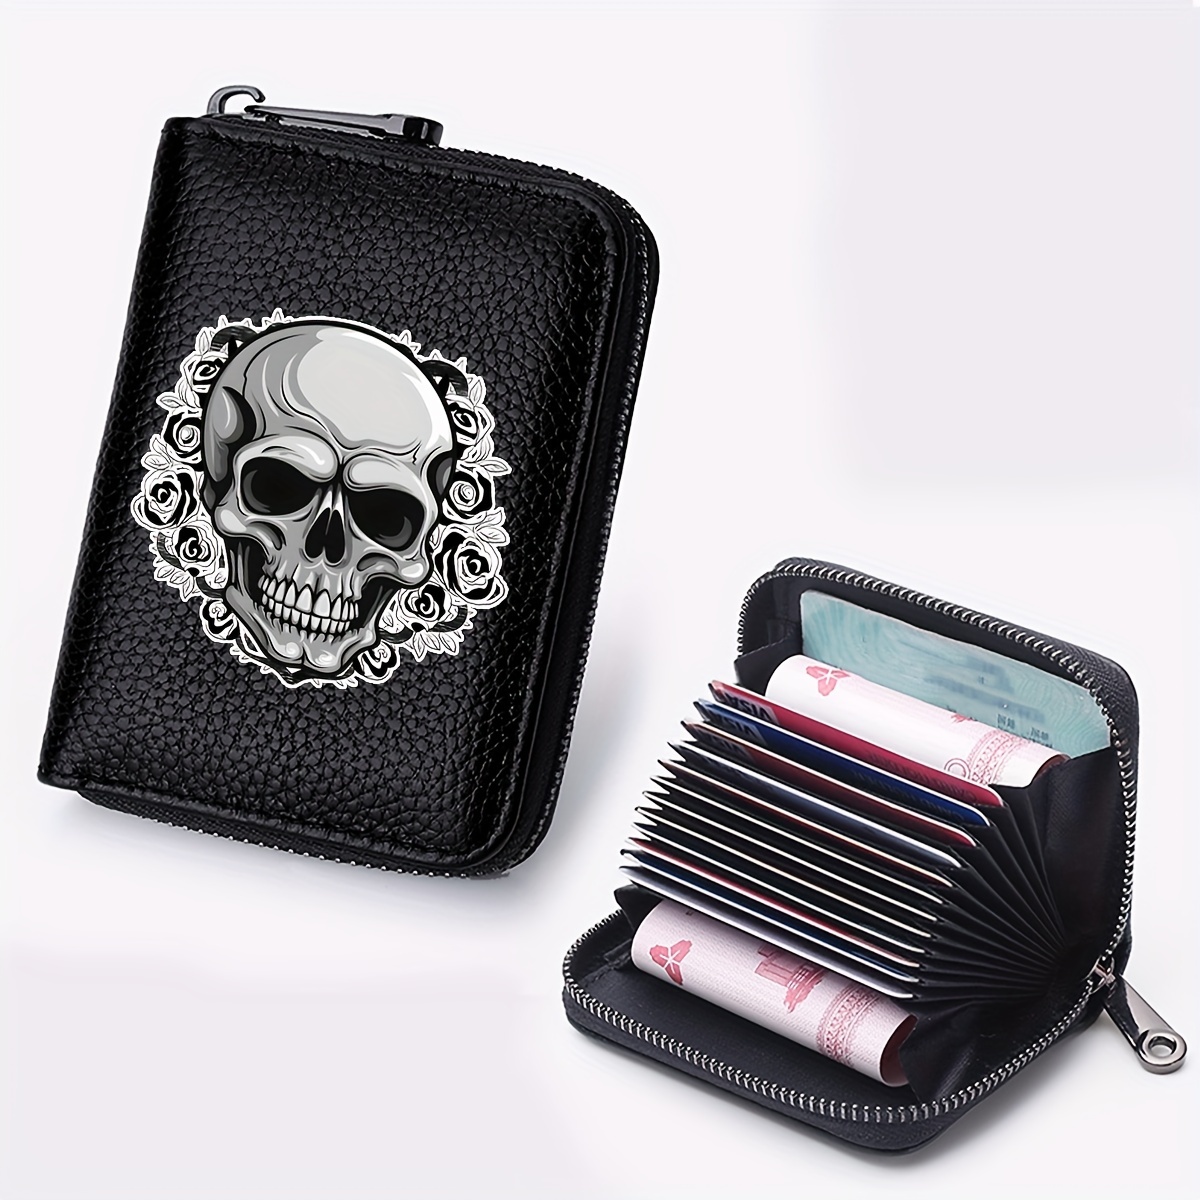 

Gothic Skull And Floral Print Wallet, Multifunctional Card Holder, Zipper Coin Purse, Unique Gift For Independence Day & Halloween